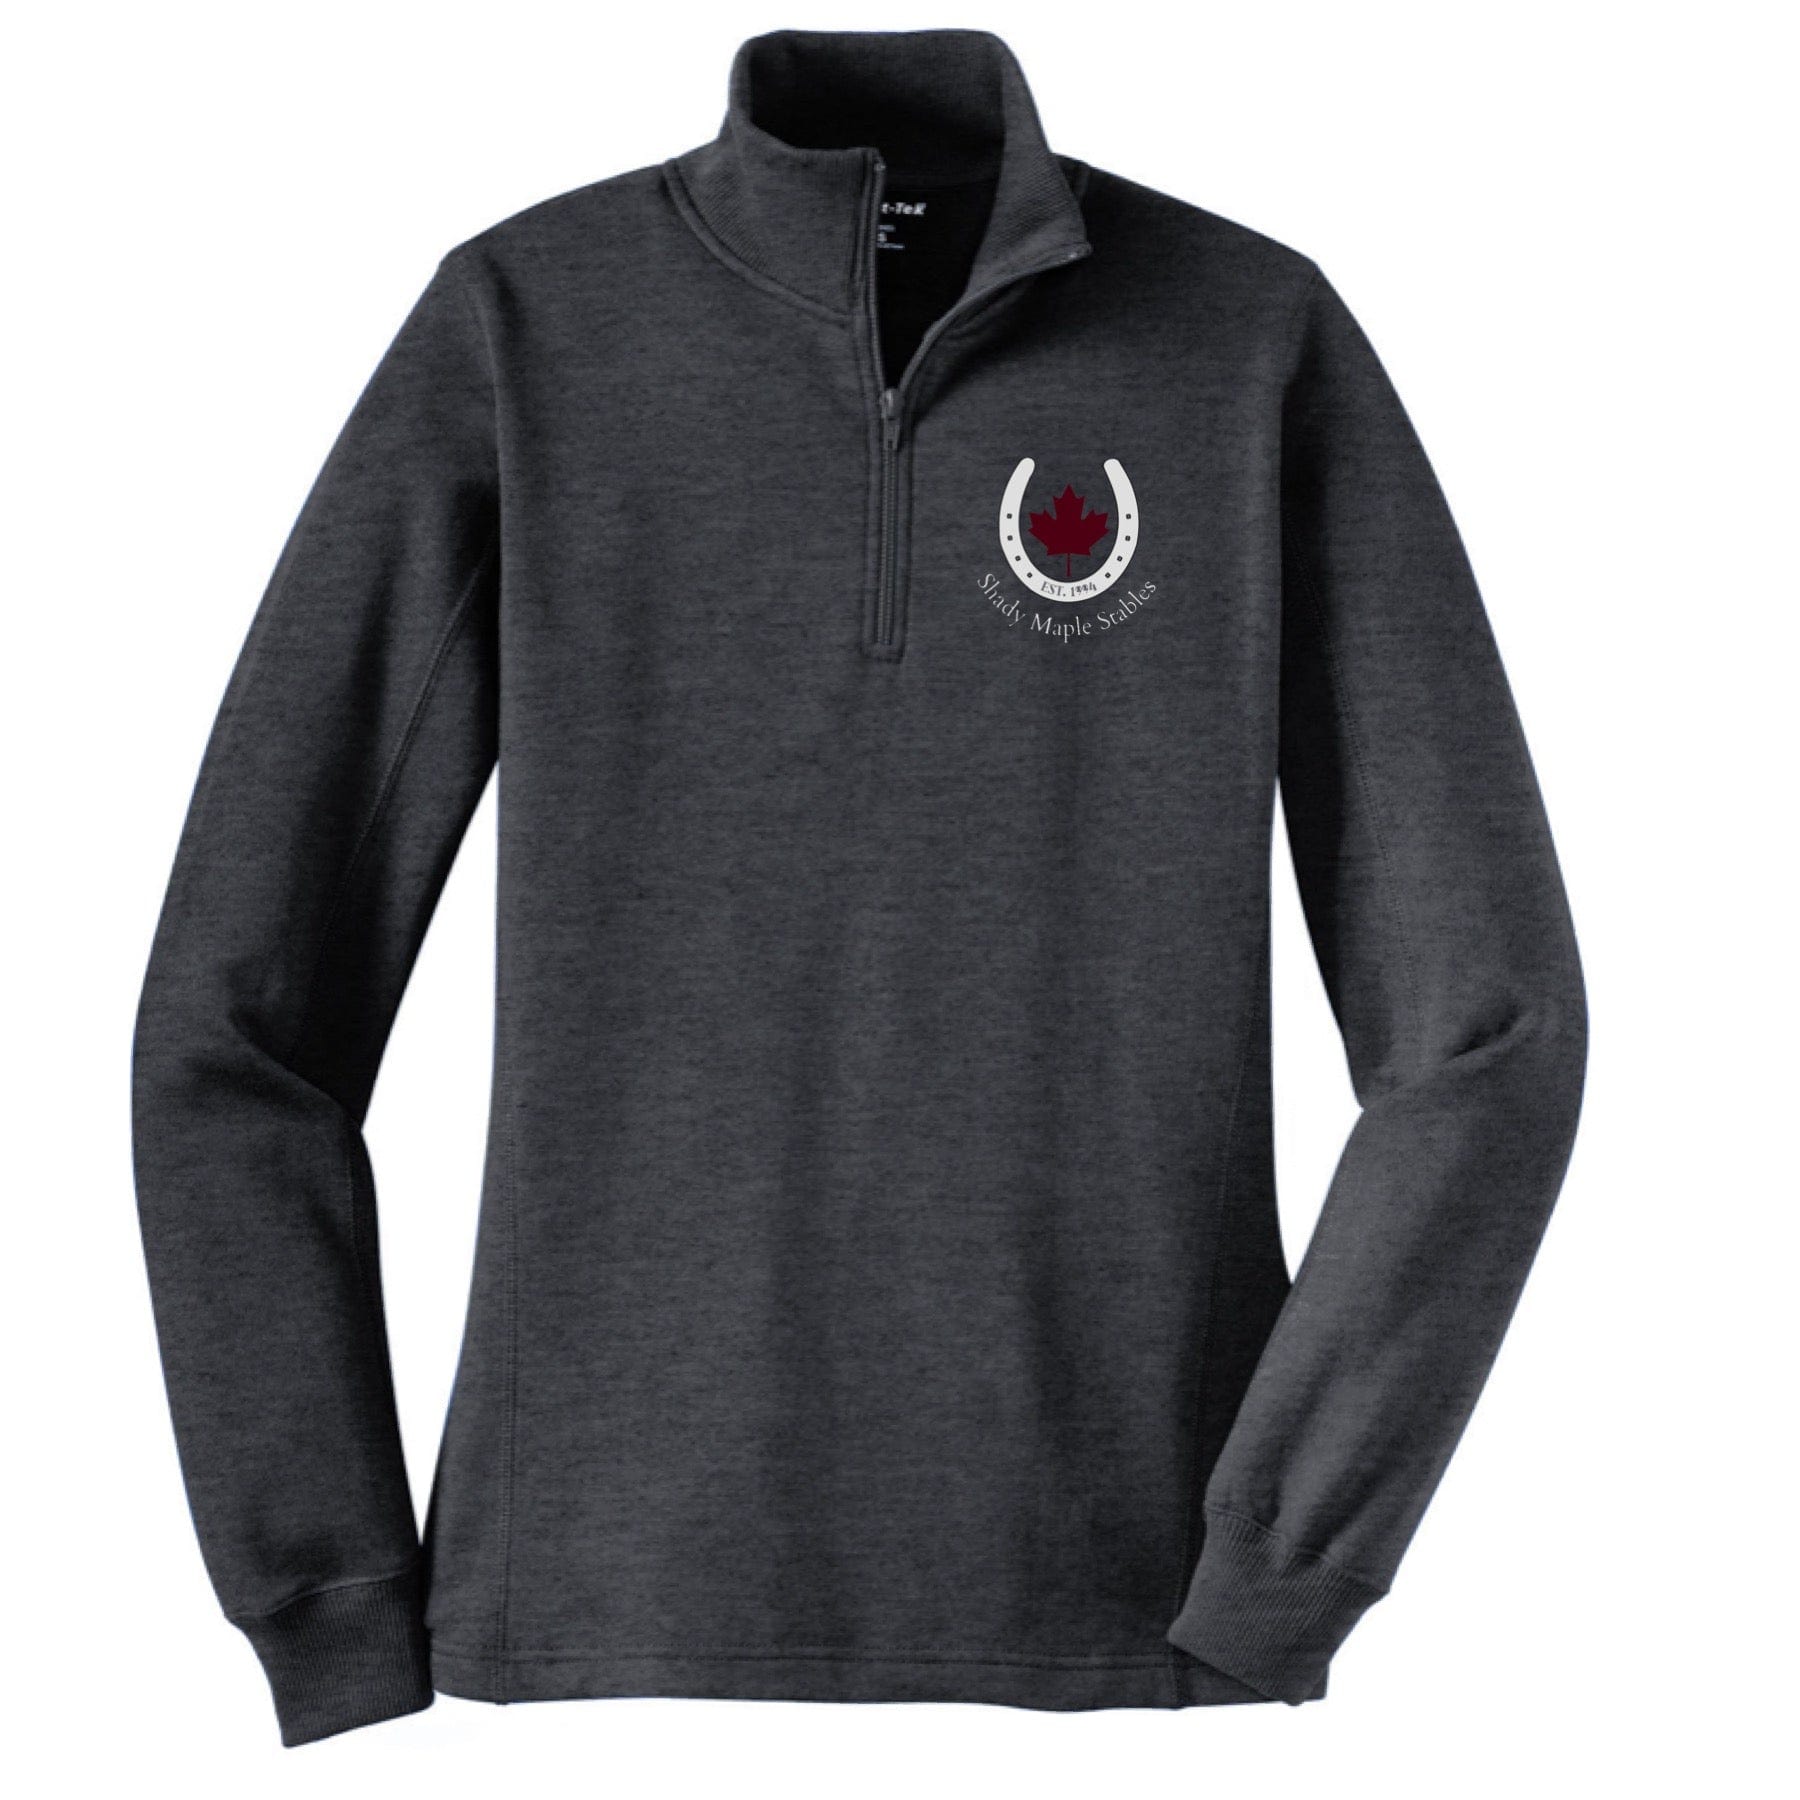 Equestrian Team Apparel Shady Maple Stables 1/4 zip sweatshirt equestrian team apparel online tack store mobile tack store custom farm apparel custom show stable clothing equestrian lifestyle horse show clothing riding clothes horses equestrian tack store